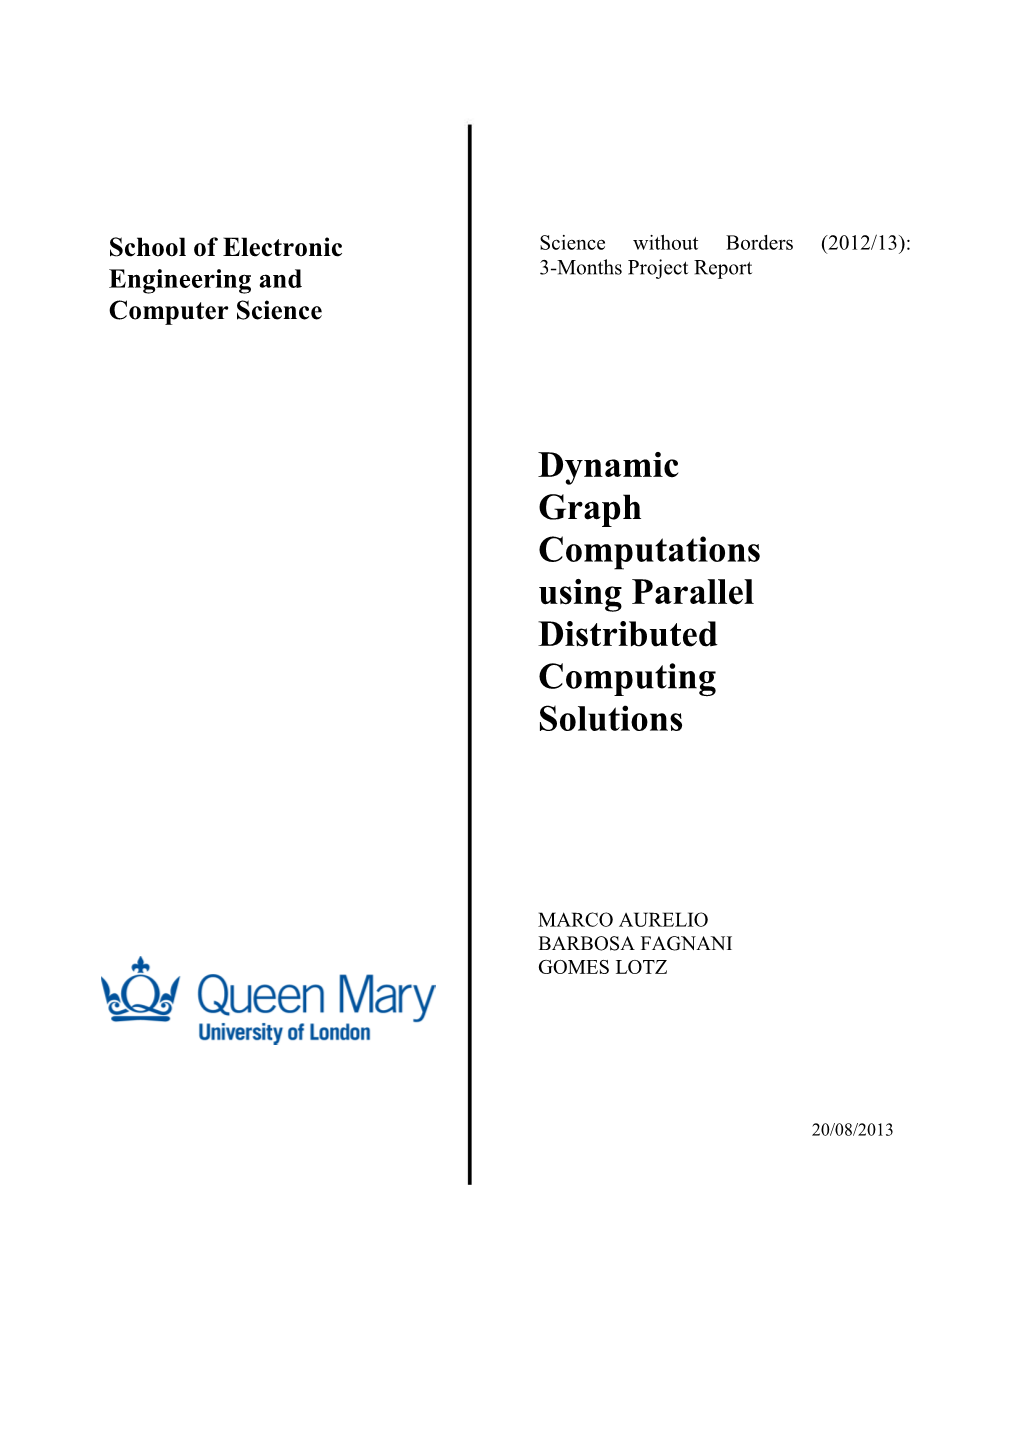 Dynamic Graph Computations Using Parallel Distributed Computing